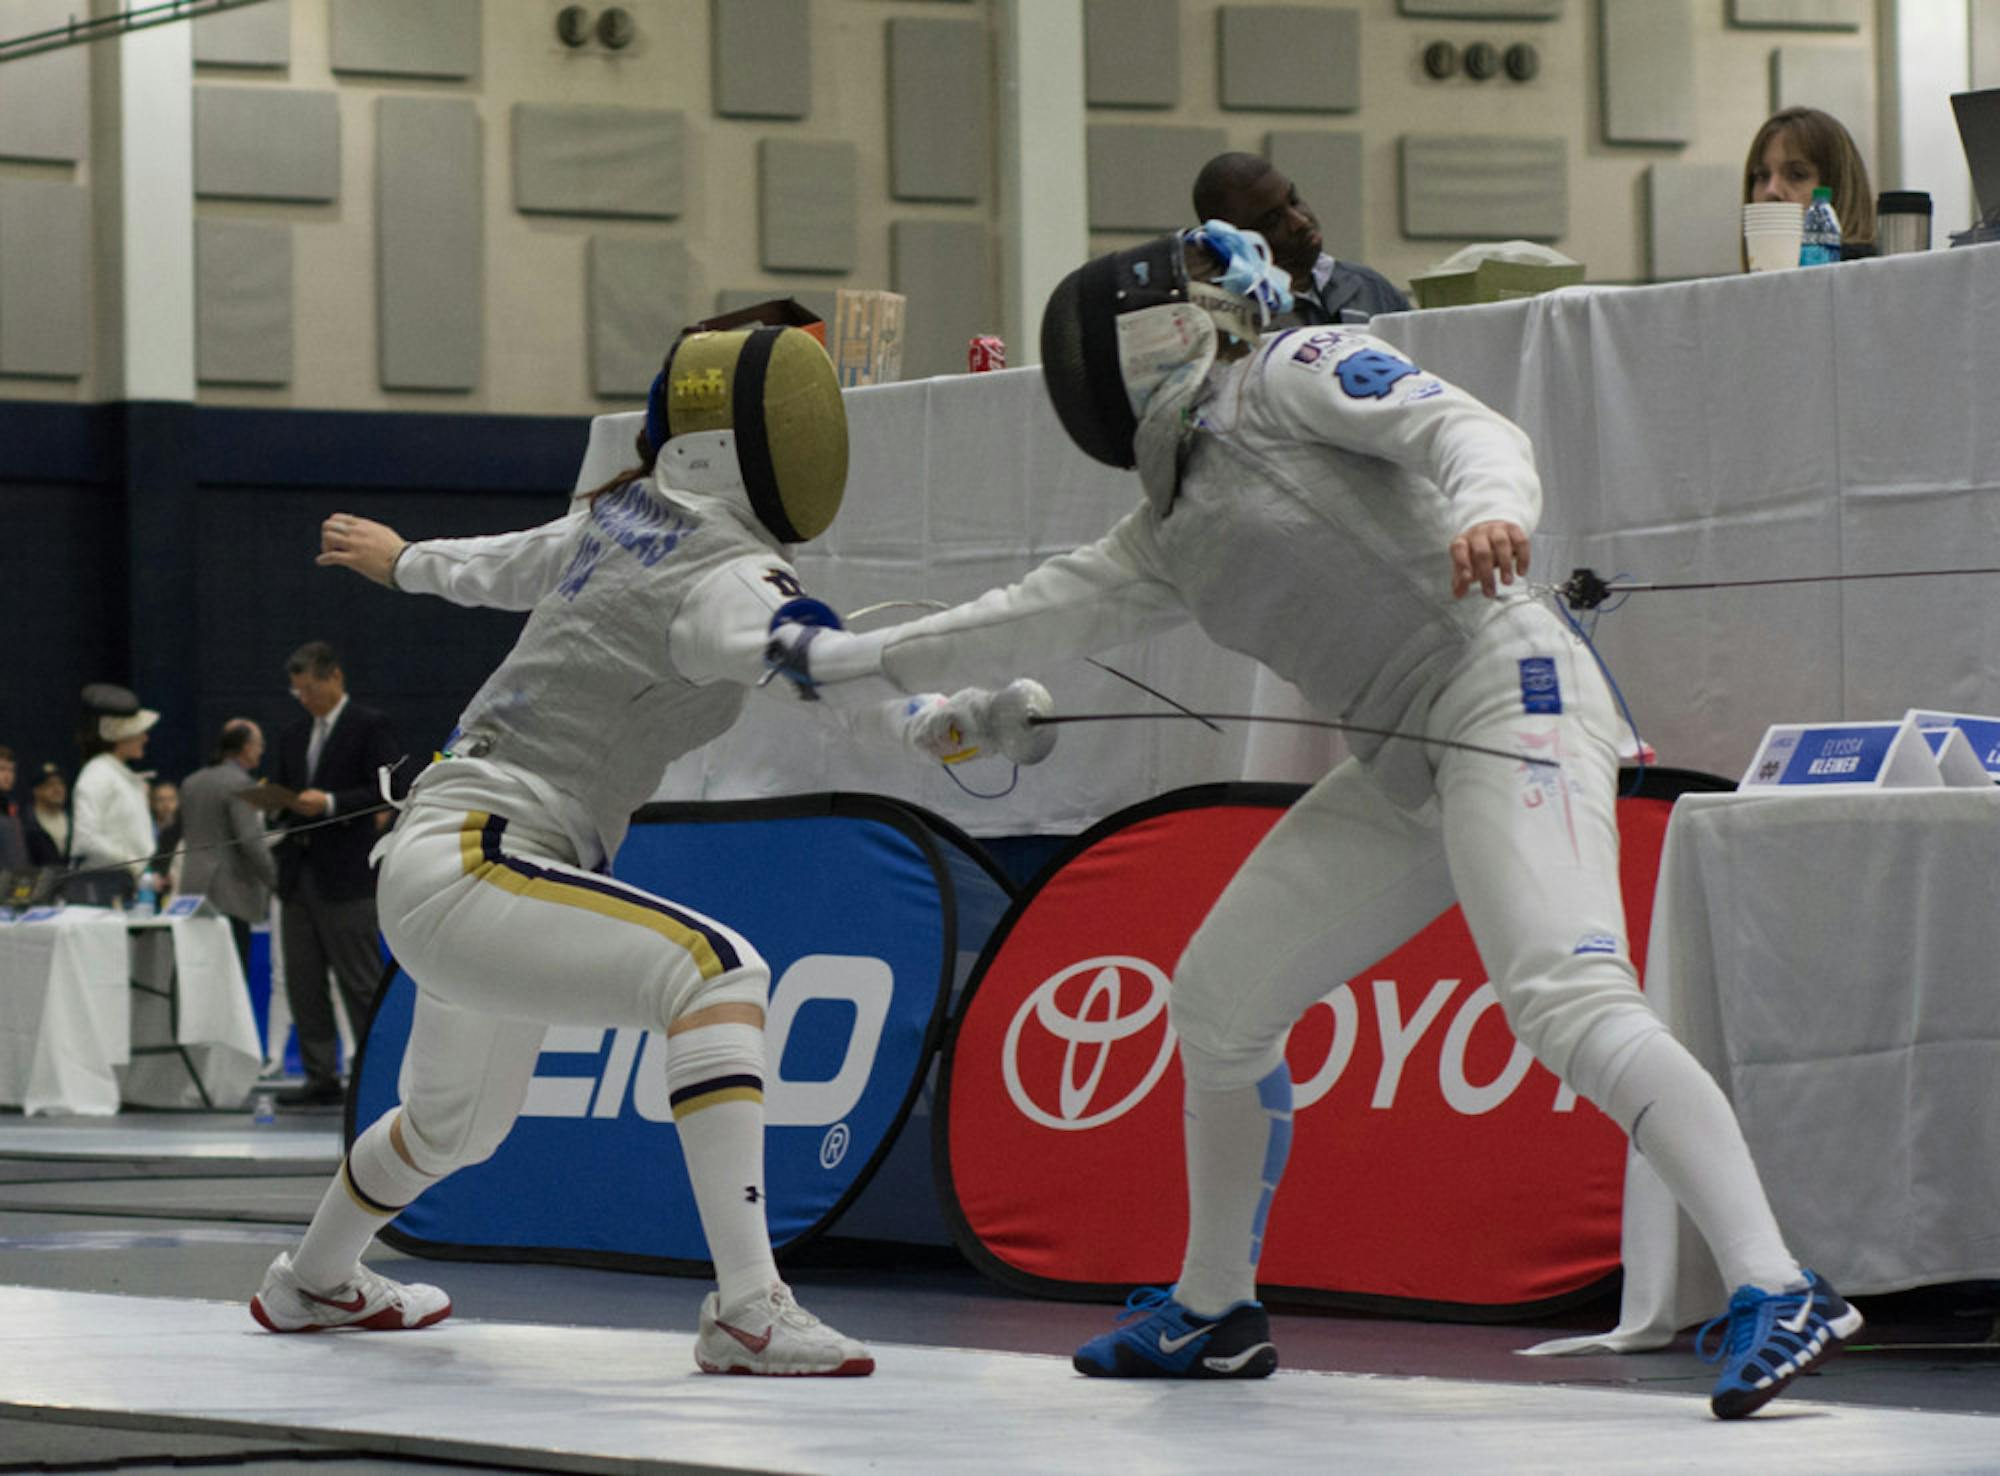 Irish junior foilist Sabrina Massialas lunges at her opponent during Notre Dame’s victory at the ACC championships on Feb. 27, 2016, at the Castellan Family Fencing Center.